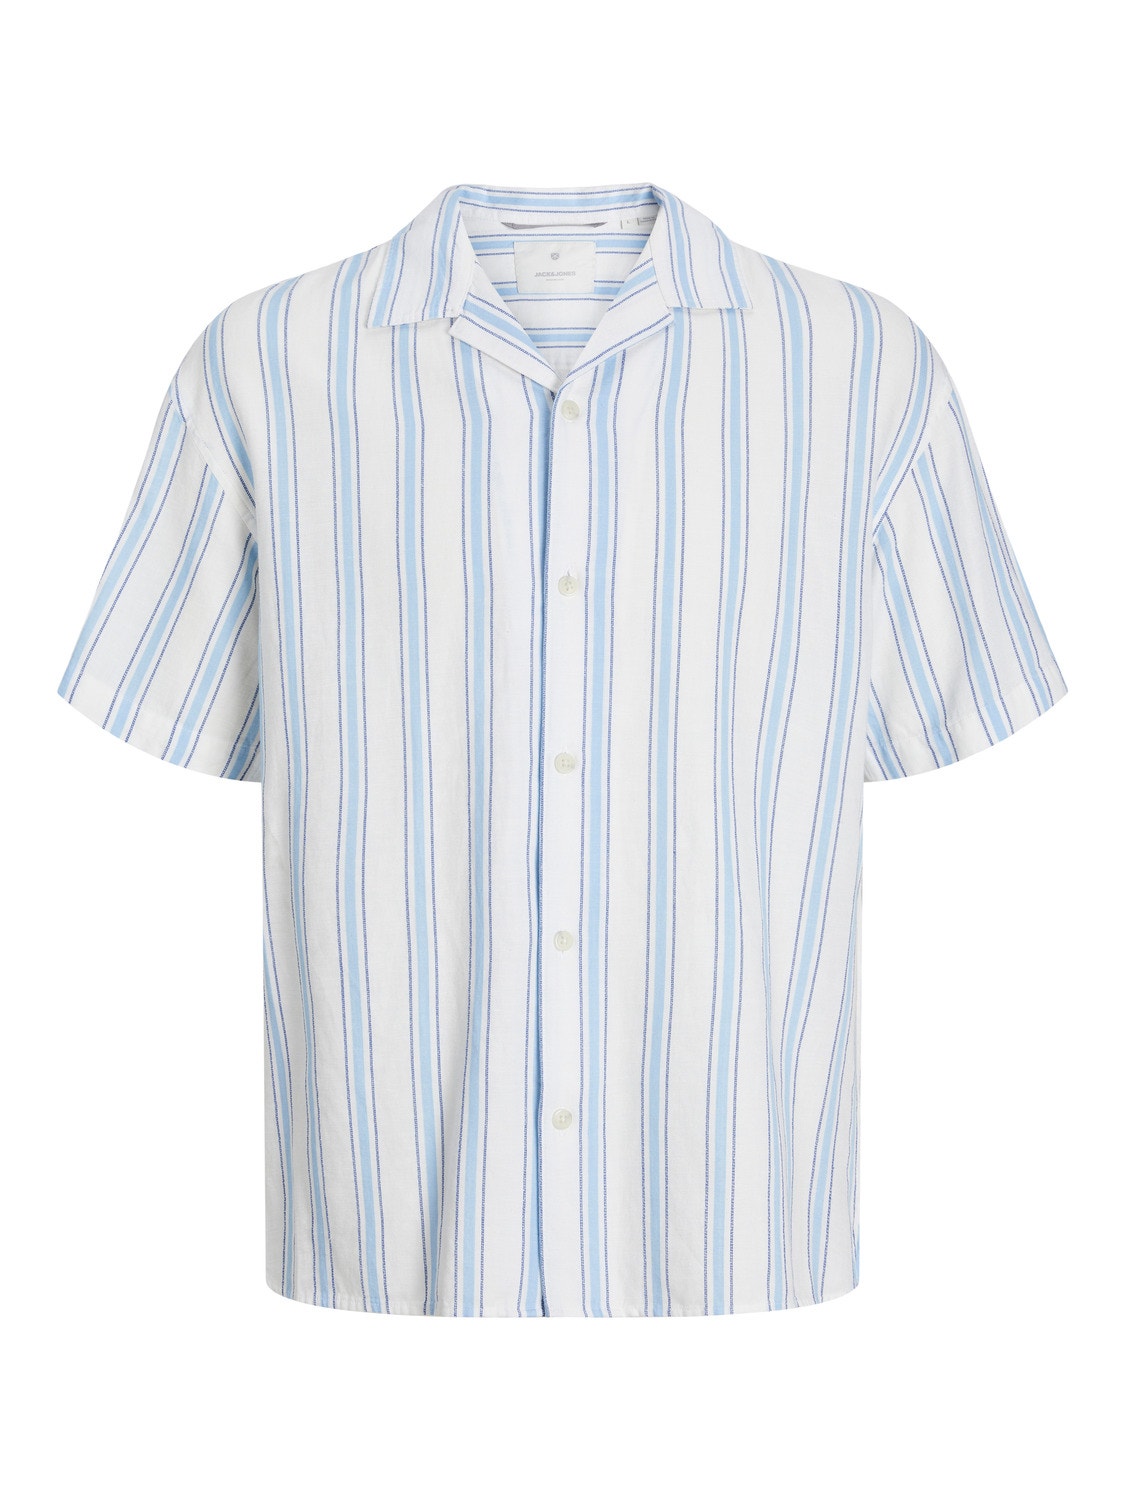 Jack & Jones Stile Hawaiano Relaxed Fit -Palace Blue - 12255818